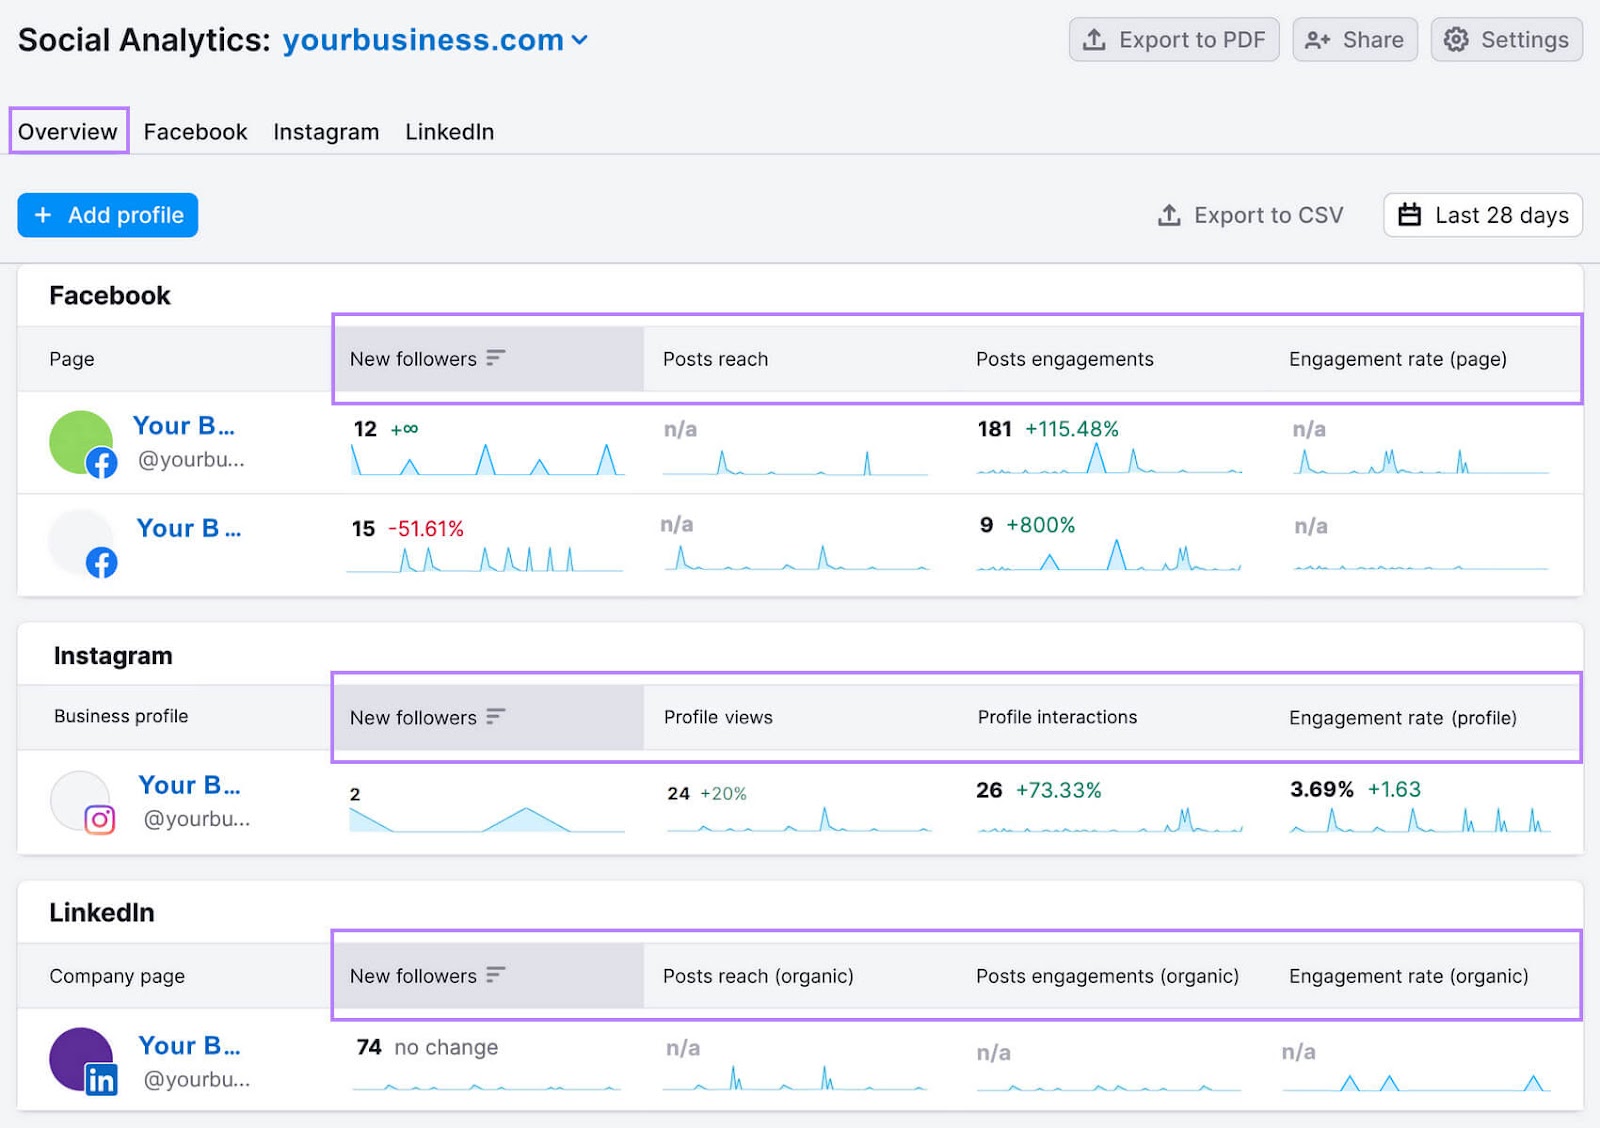 an overview report in Social Analytics tool, showing new followers, post reach, engagements, and average engagement rate